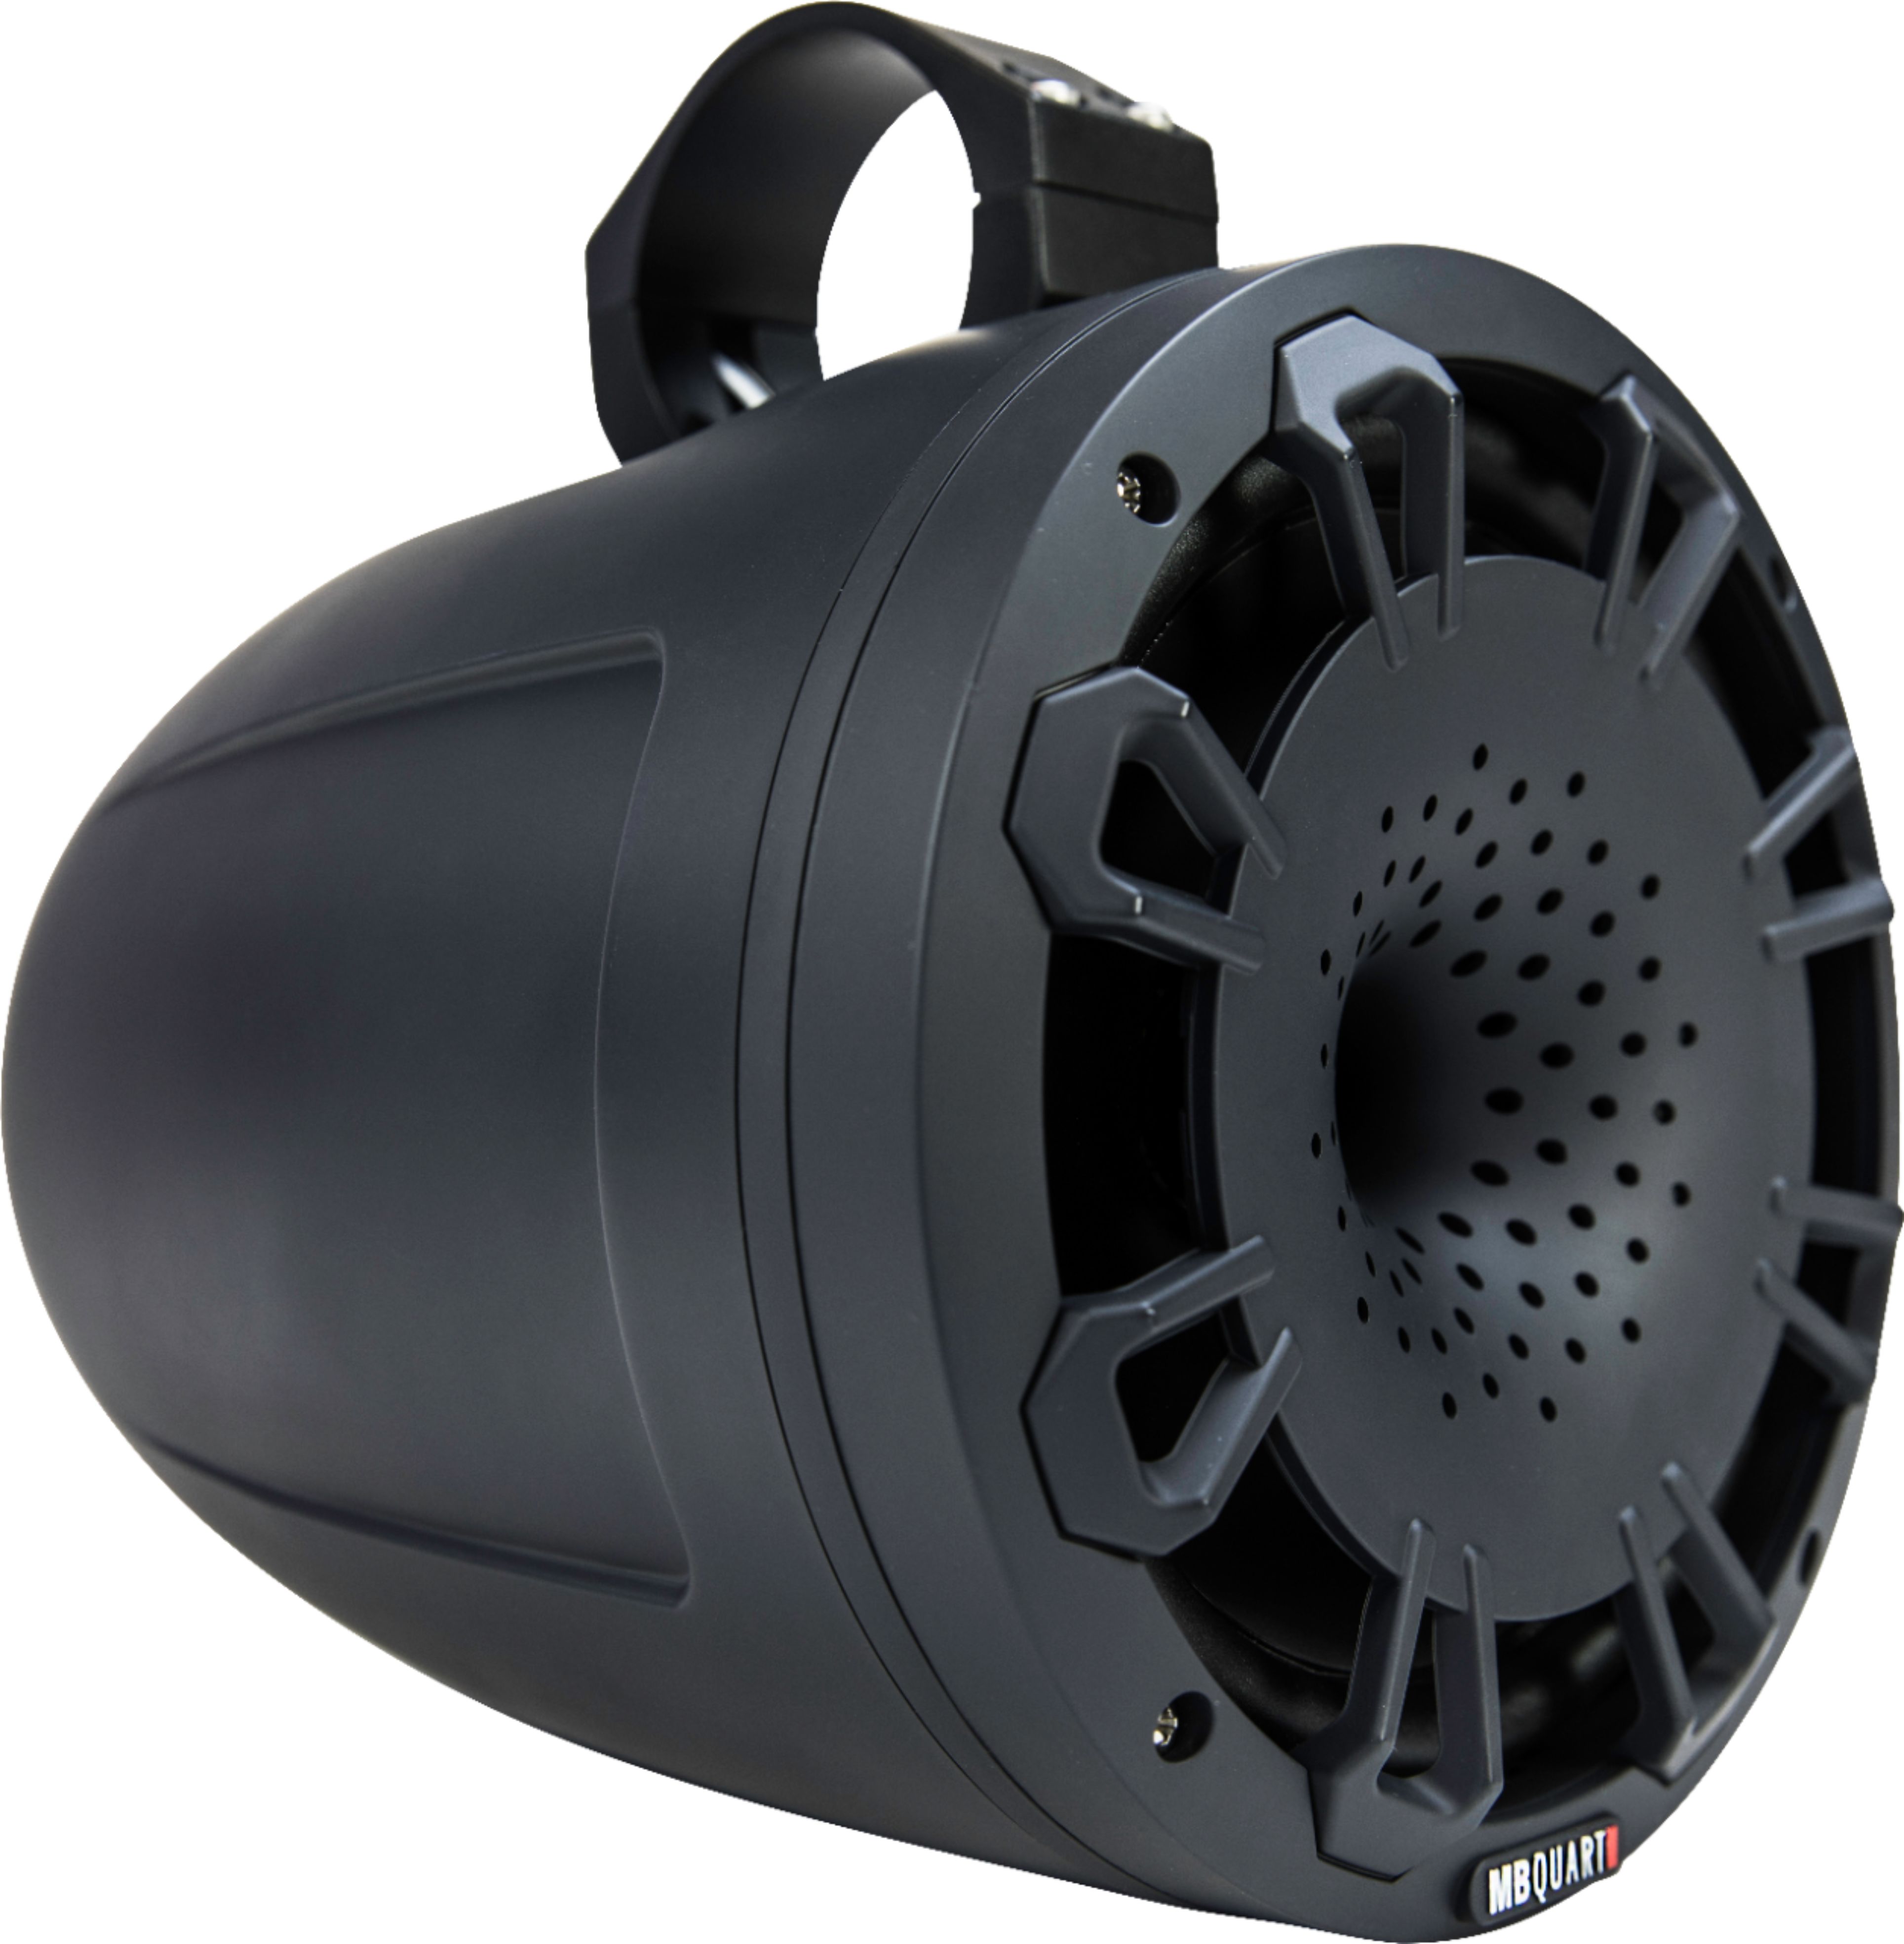 Angle View: MB Quart - 8" 2-Way Marine Speaker with Composite Polypropylene Cones (Pair) - Black